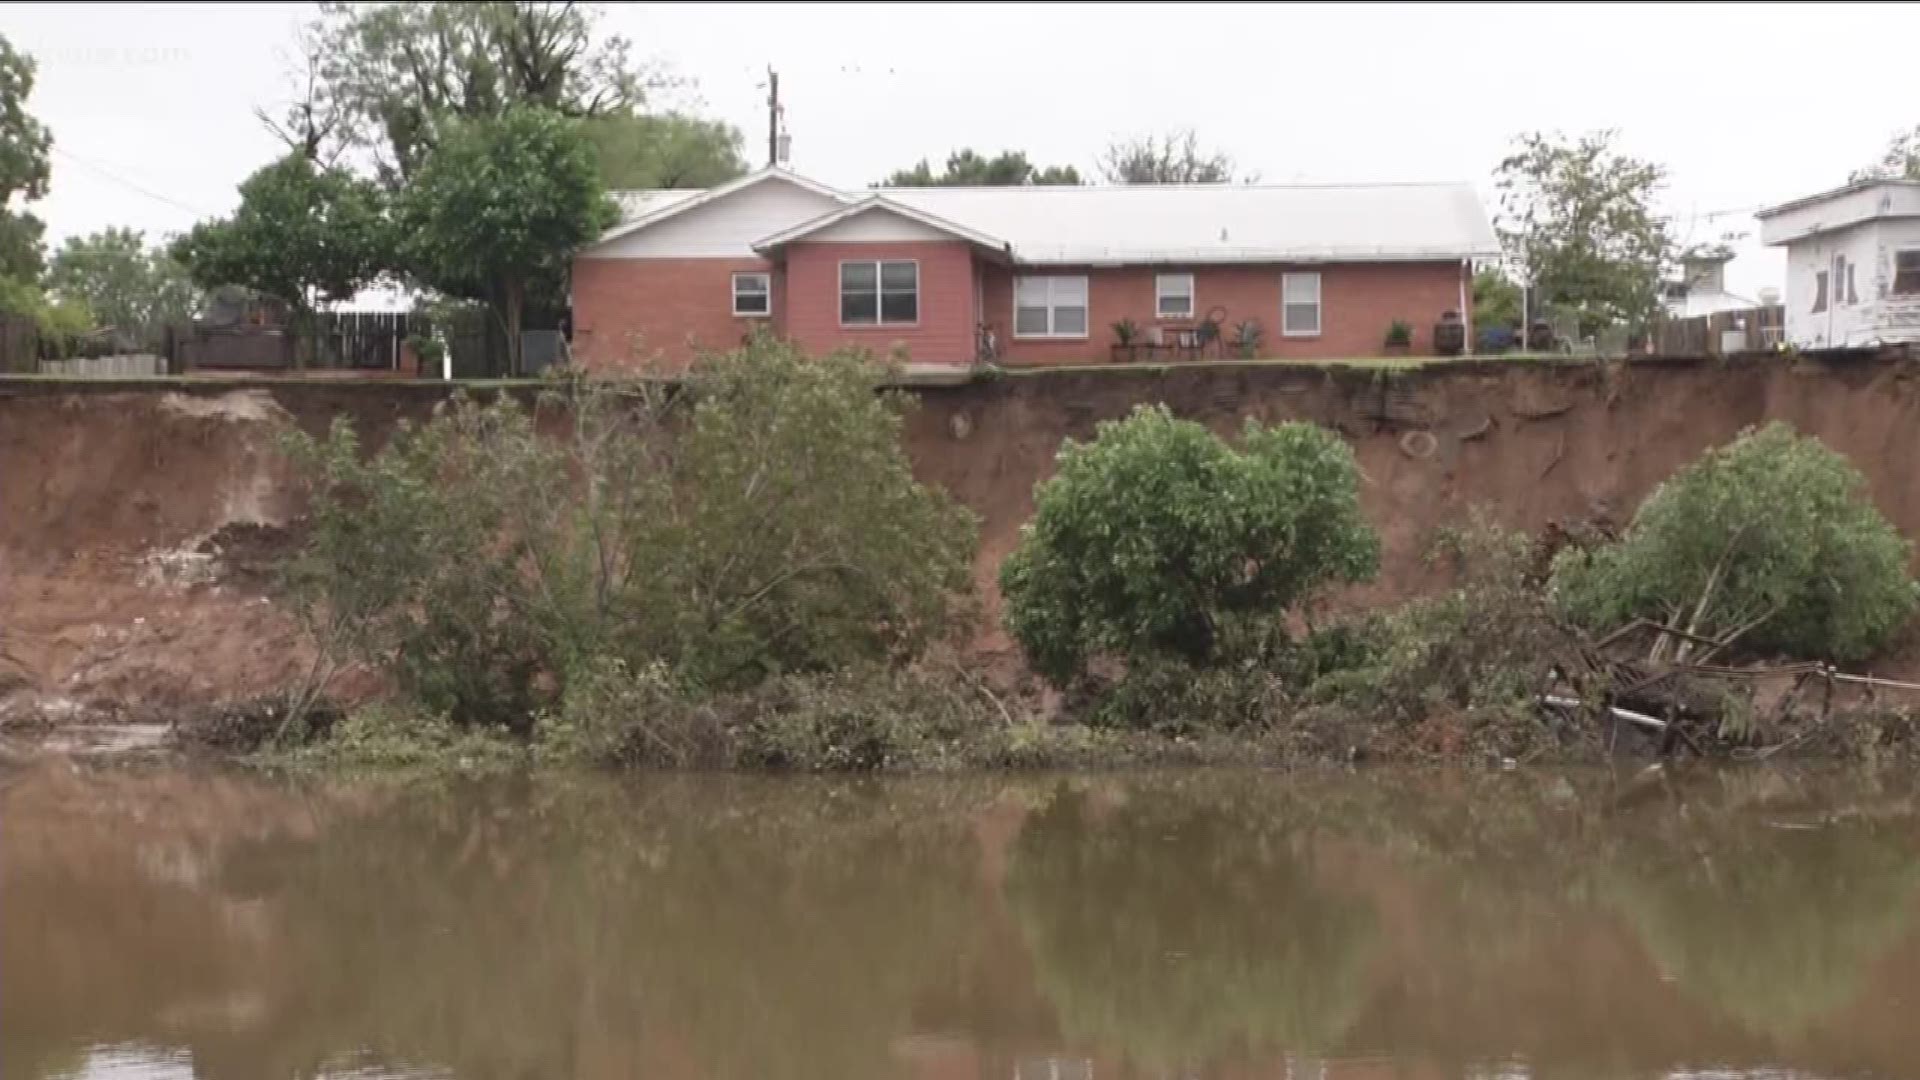 Near Marble Falls, families are finally able to return to their homes and businesses after high water damaged close to 100 structures.